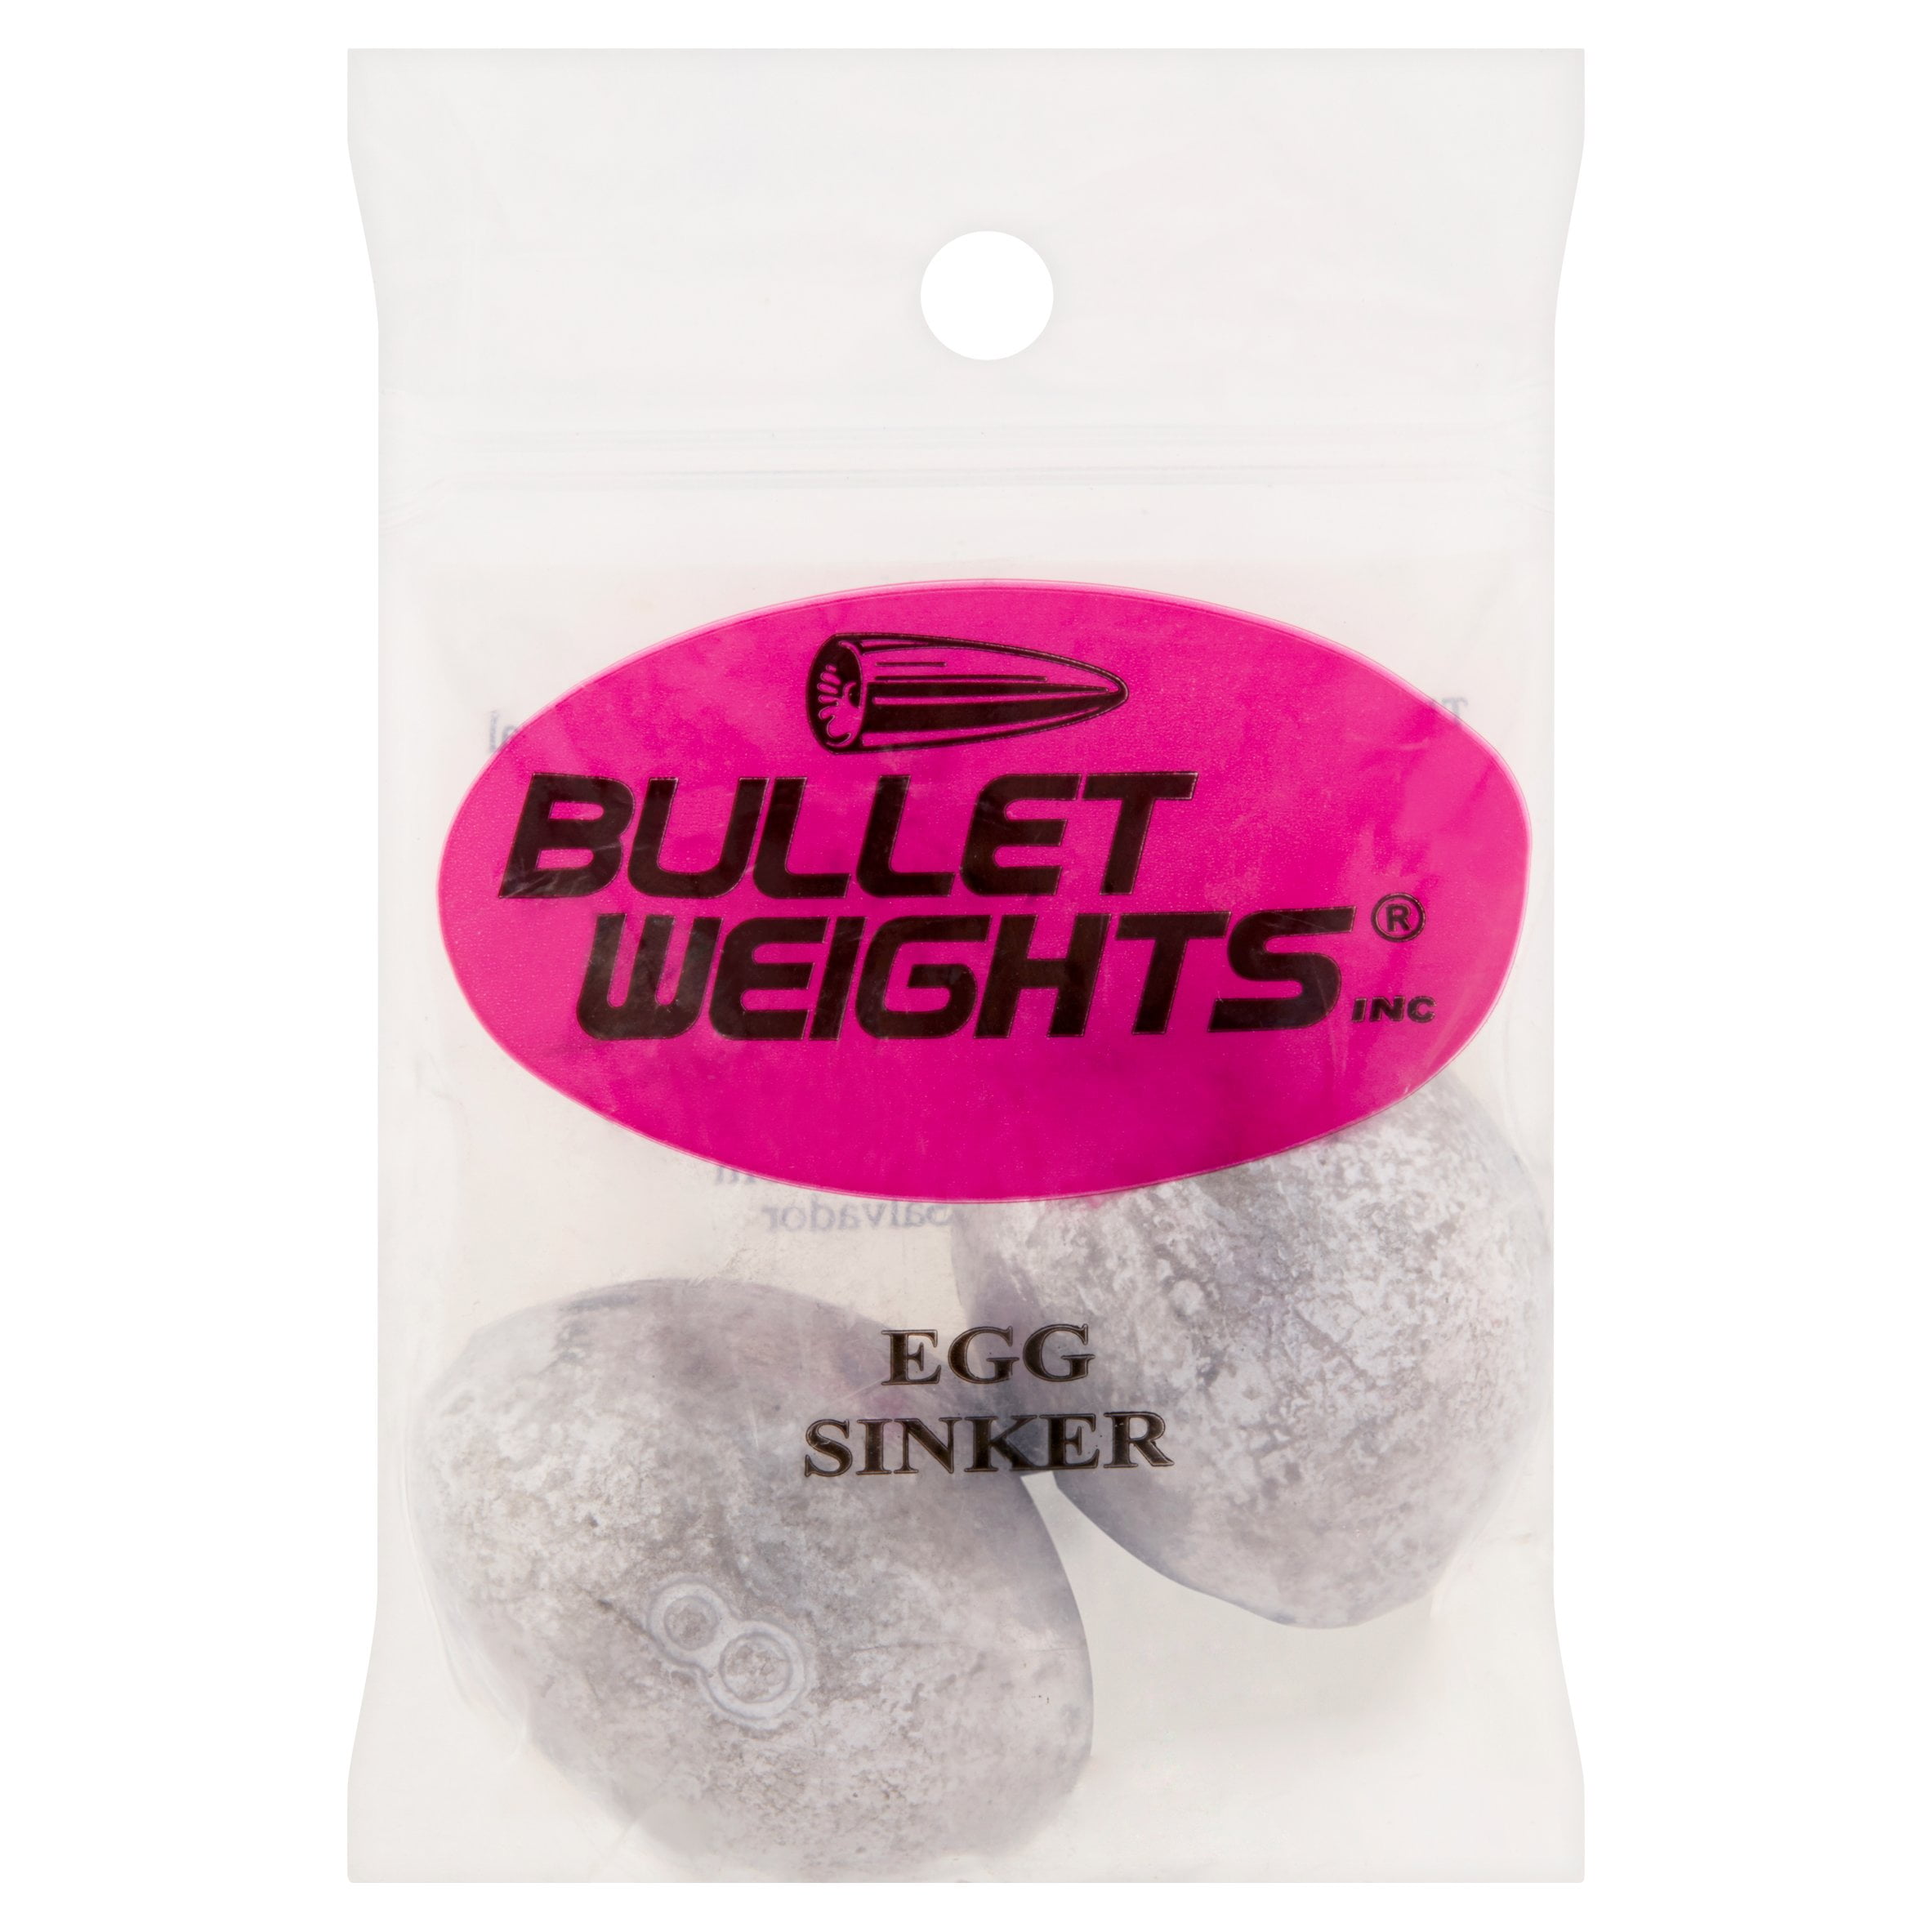 weights 8 oz egg sinkers quantity of 3/6/12/25/50/100/250 FREE SHIPPING 